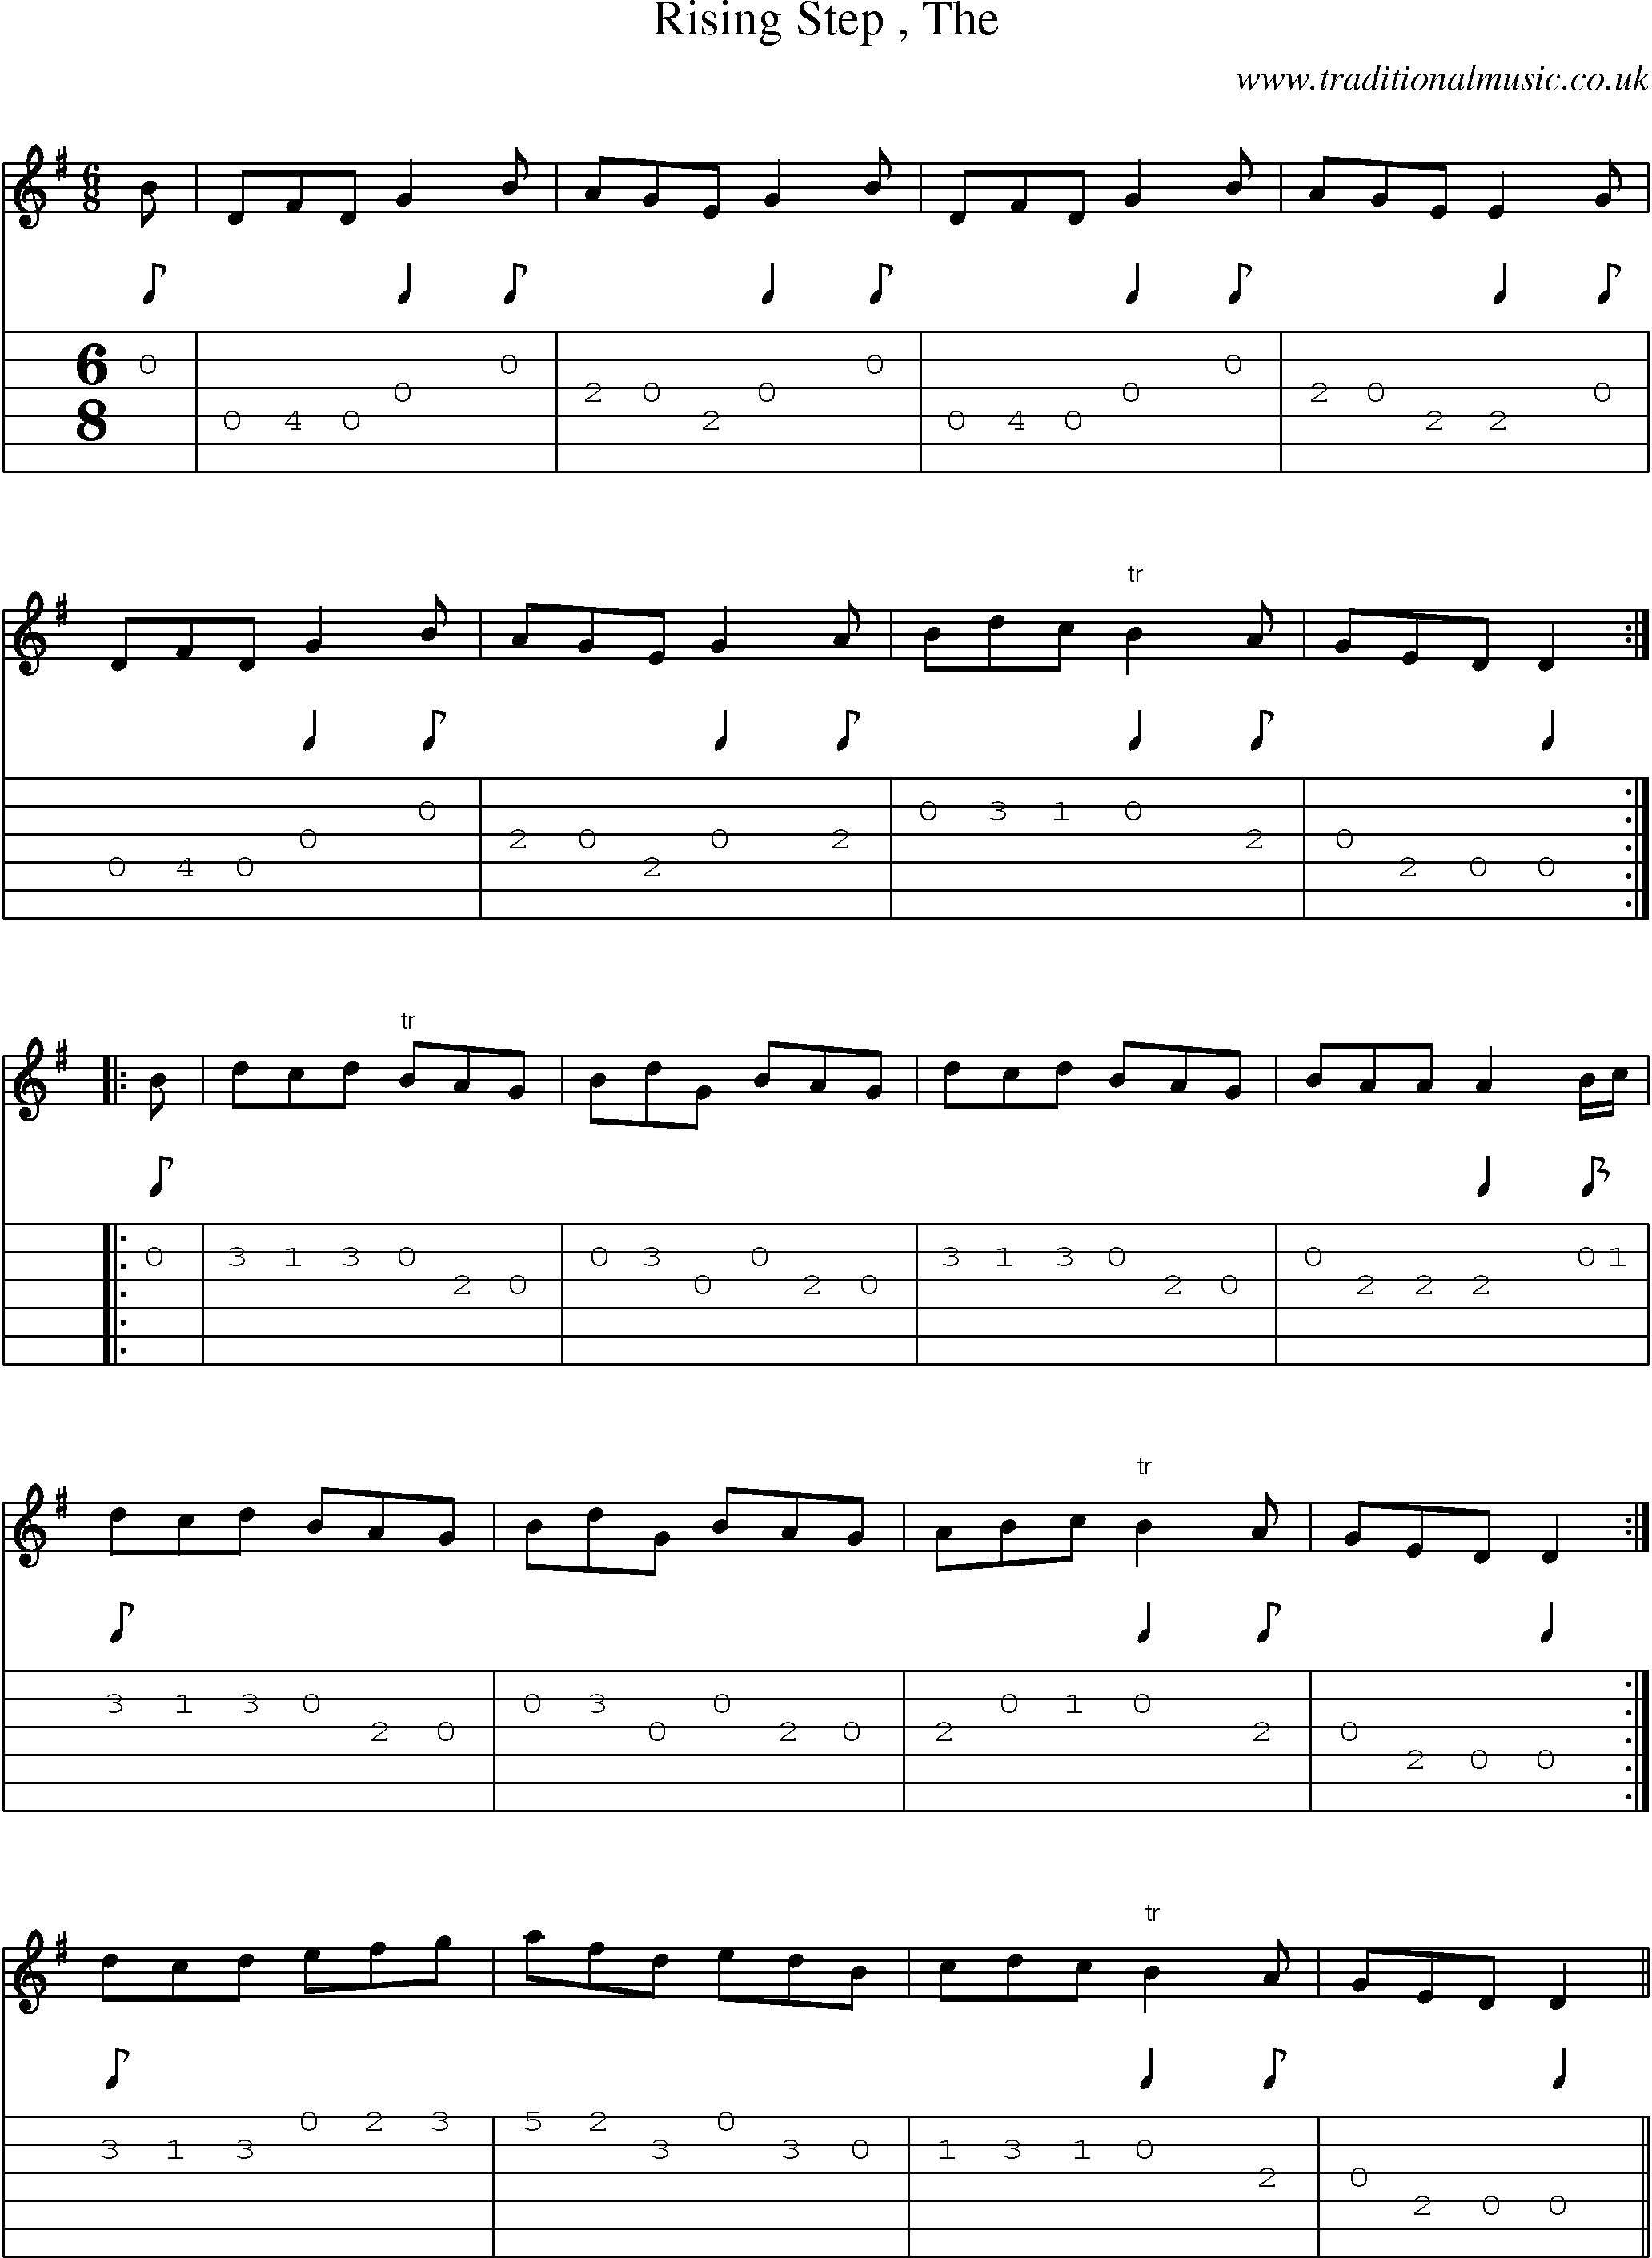 Music Score and Guitar Tabs for Rising Step